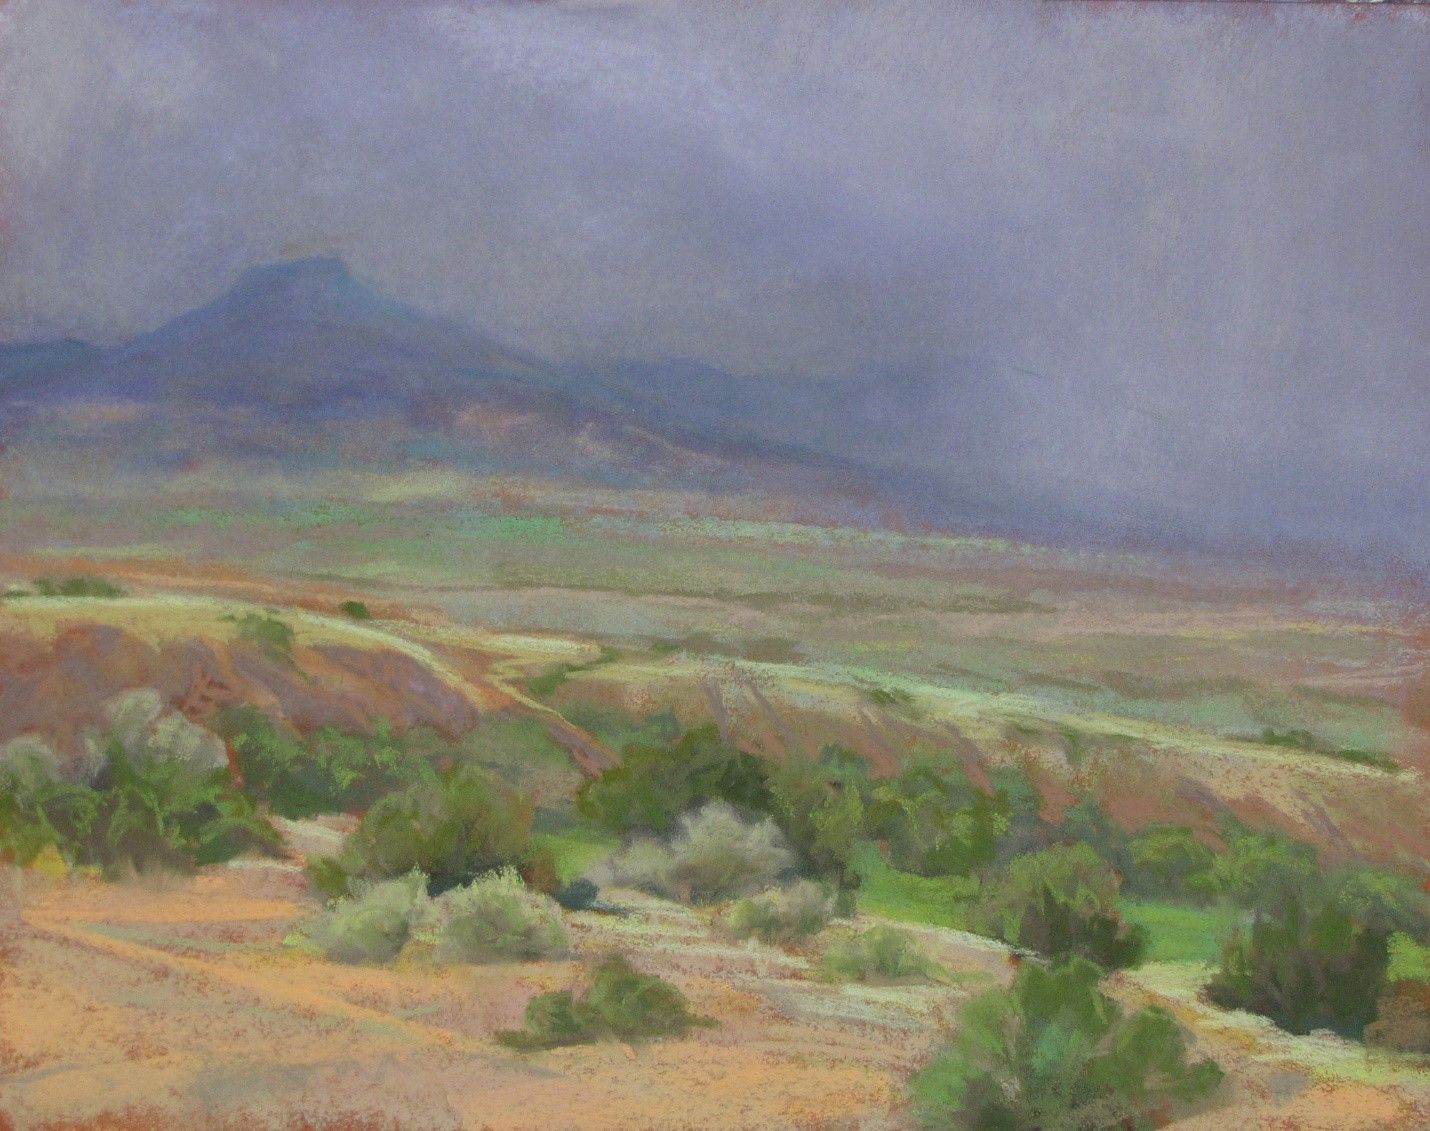 Approaching Rain at Ghost Ranch by Nancy Silvia.